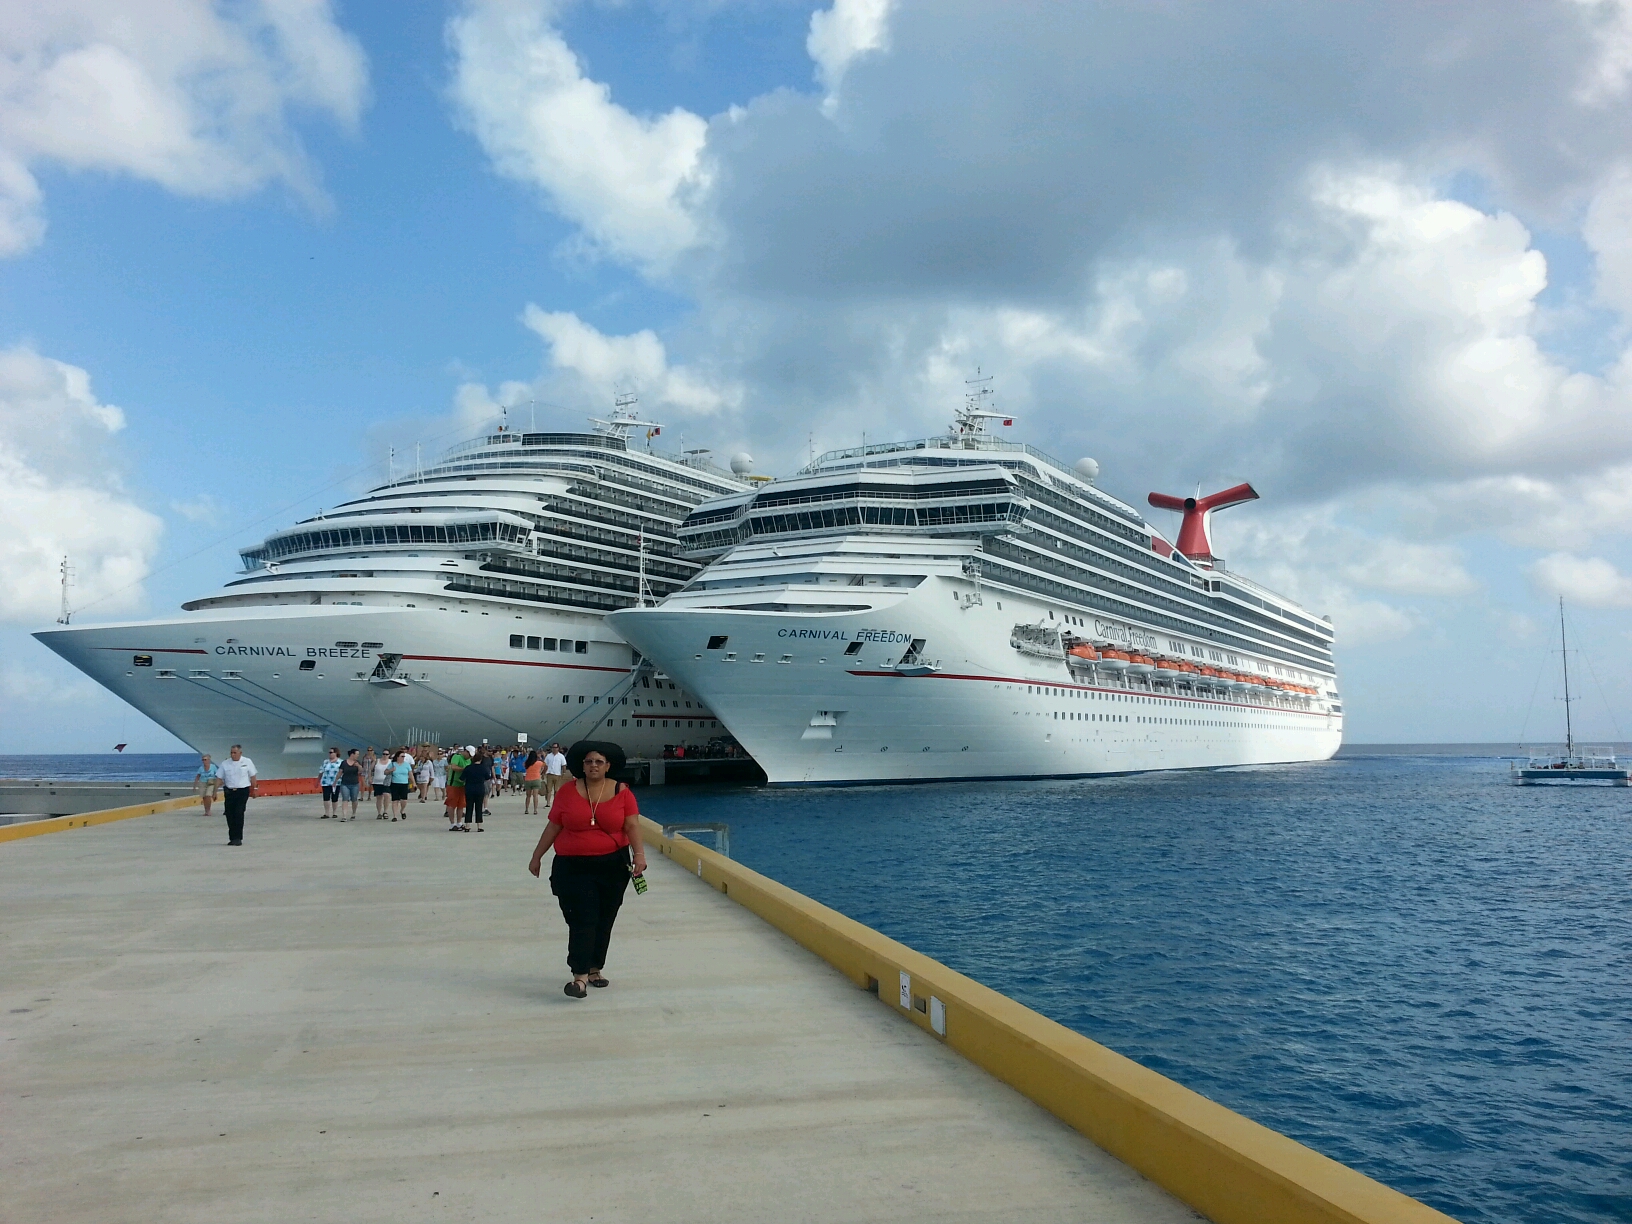 carnival-freedom-cruise-ship-reviews-and-photos-cruiseline